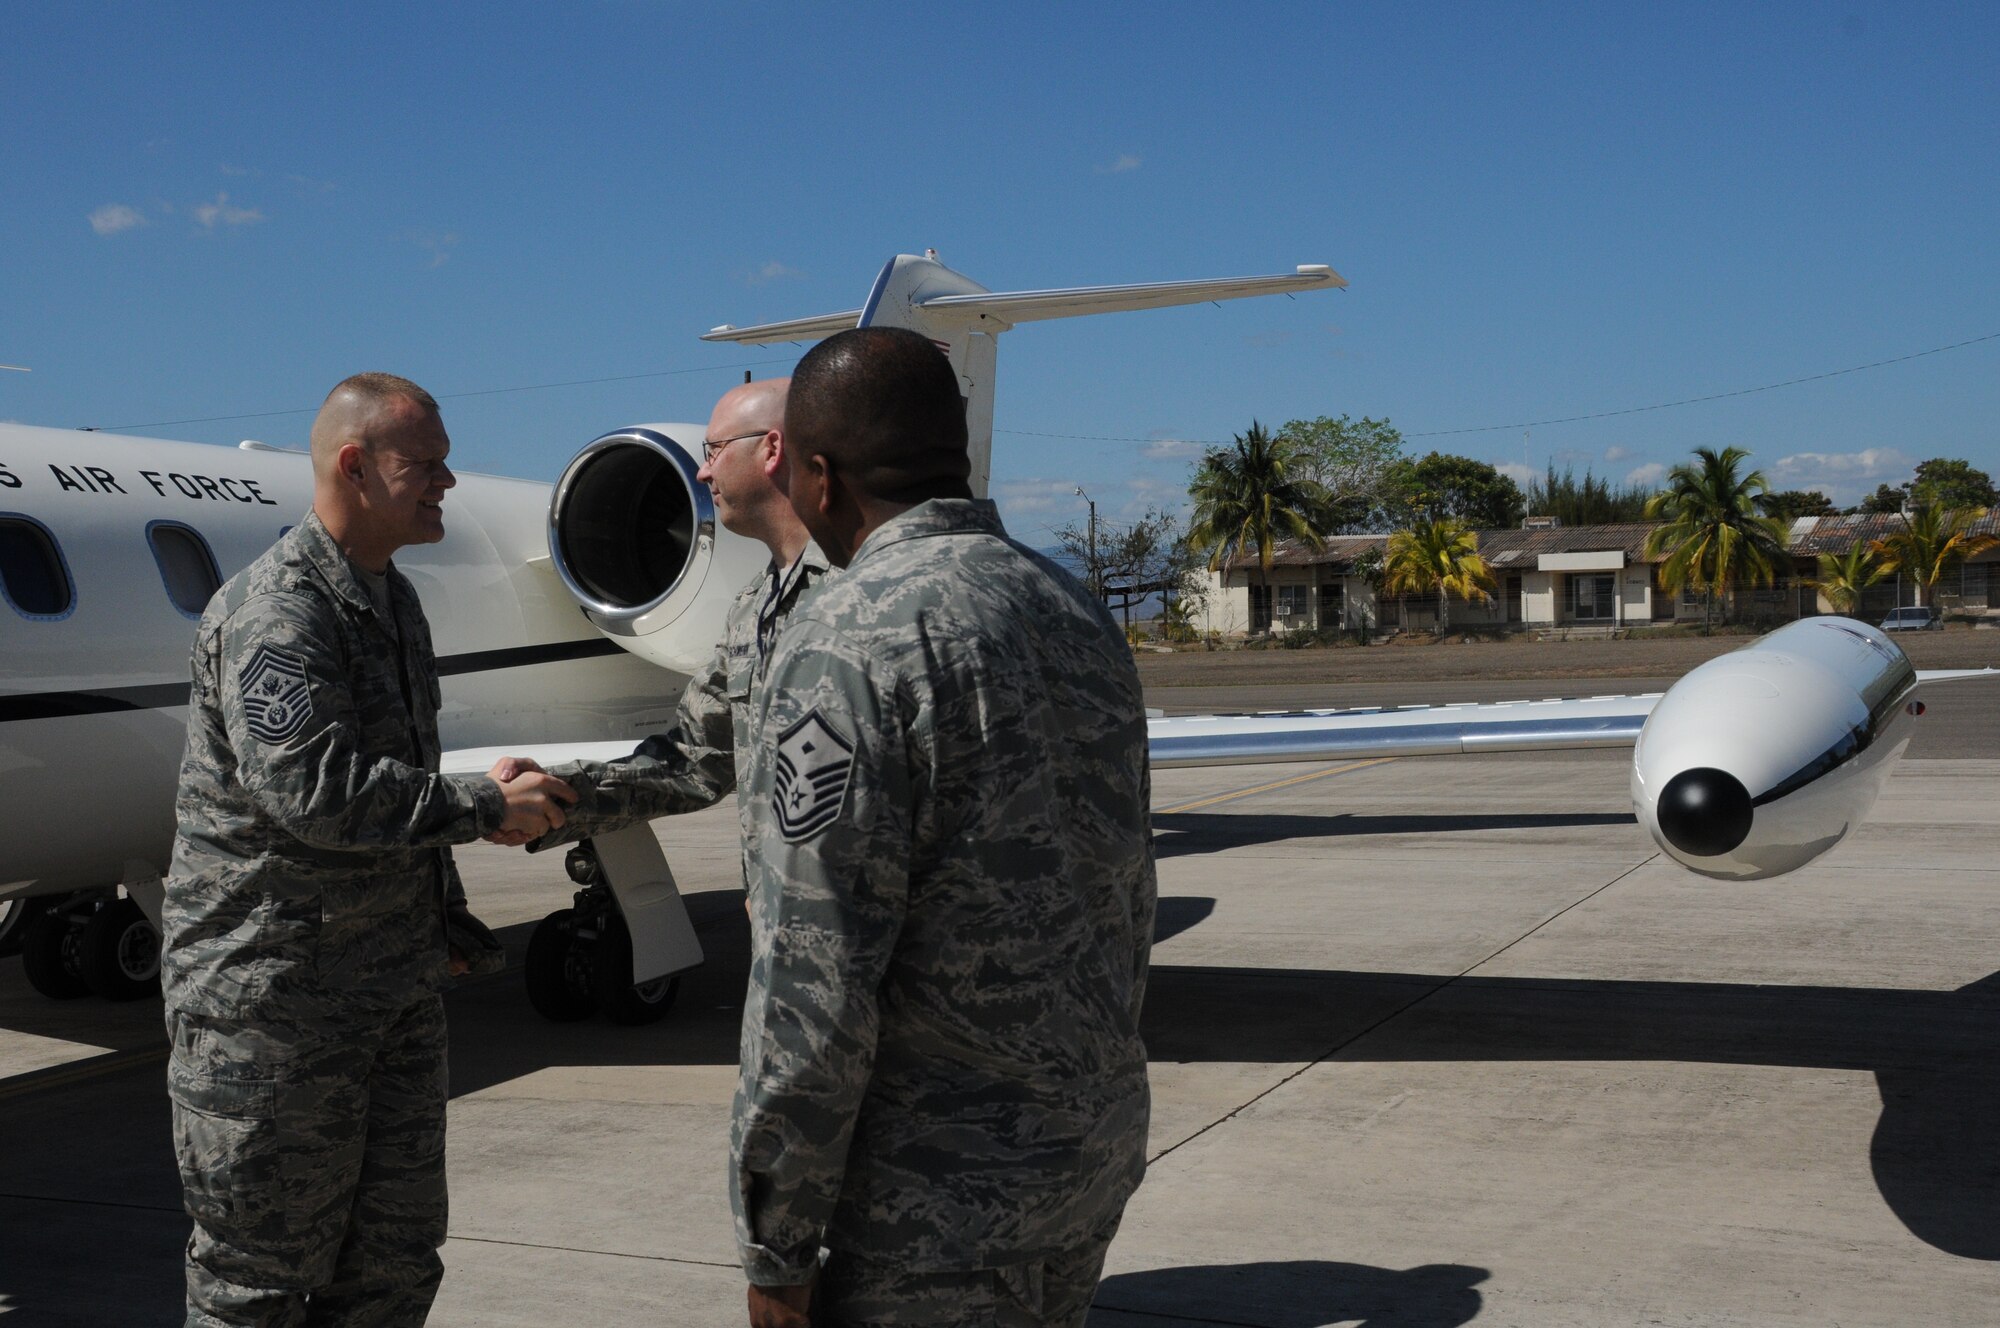 SOTO CANO AIR BASE, Honduras -- Chief Master Sgt. of the Air Force James Roy is greeted to Soto Cano Air Base Jan. 30 by the 612th Air Base Squadron Senior Enlisted Leader, Chief Master Sgt. Thomas Schwenk and the 612th ABS first sergeant, Master Sgt. Emmit Bartee. During Chief Roy's visit to Soto Cano, he toured many facilities, conducted meet-and-greets and spoke with Airmen about key focuses in the Air Force today. (U.S. Air Force photo/Staff Sgt. Kimberly Rae Moore)